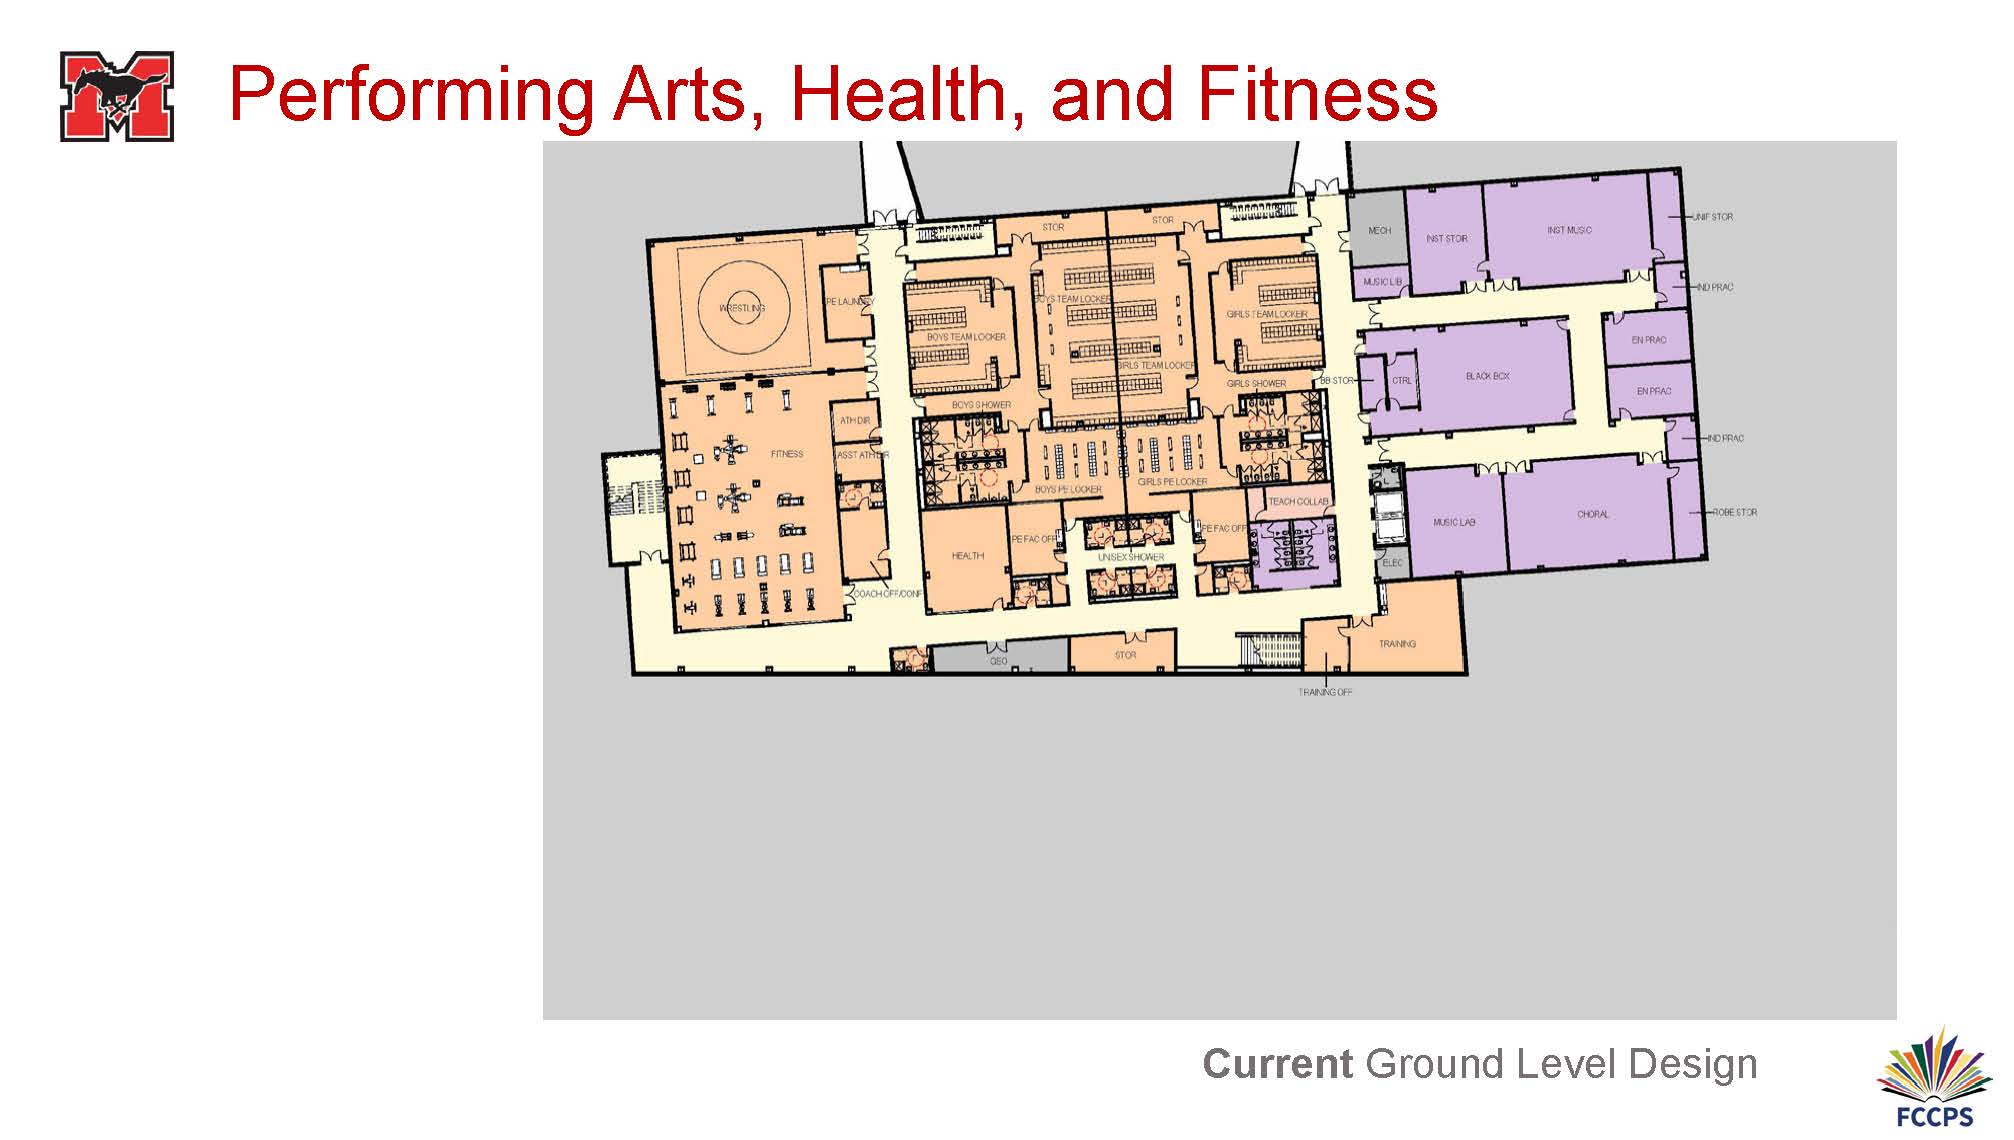 Performing Arts, Health, and Fitness